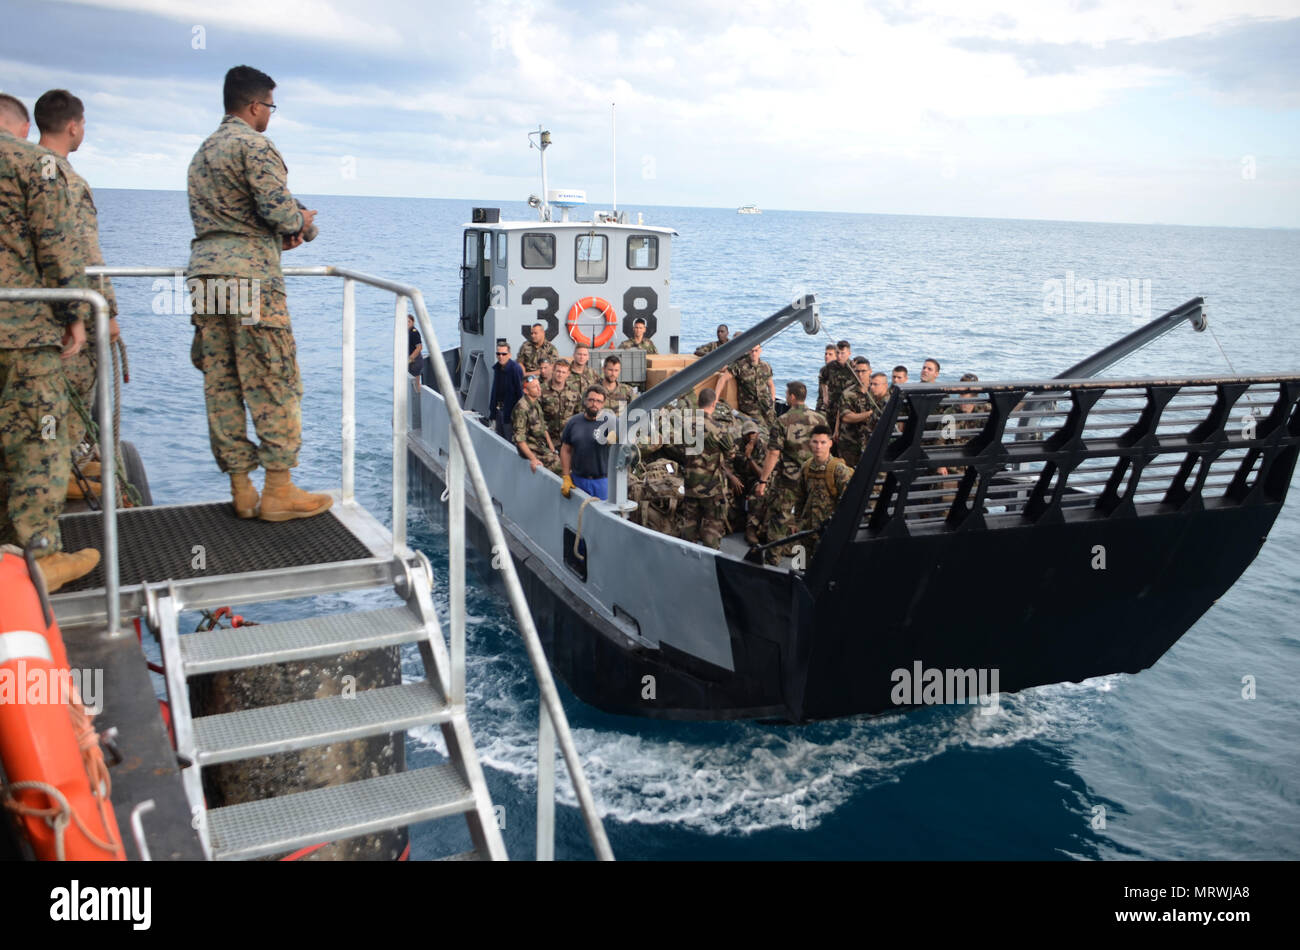 170710-N-WJ640-035 NOUMEA, New Caledonia (July 10, 2017) French Armed Forces New Caledonia prepare to board USNS Sacagawea (T-AKE 2) to transit with embarked U.S. Marines for a field exercise in Nuku'alofa, Tonga during Koa Moana 17, July 10. Koa Moana 17 is designed to improve theater security, and conduct law enforcement and infantry training in the Pacific region in order to enhance interoperability with partner nations. (U.S. Navy photo by Mass Communication Specialist 3rd Class Madailein Abbott) Stock Photo